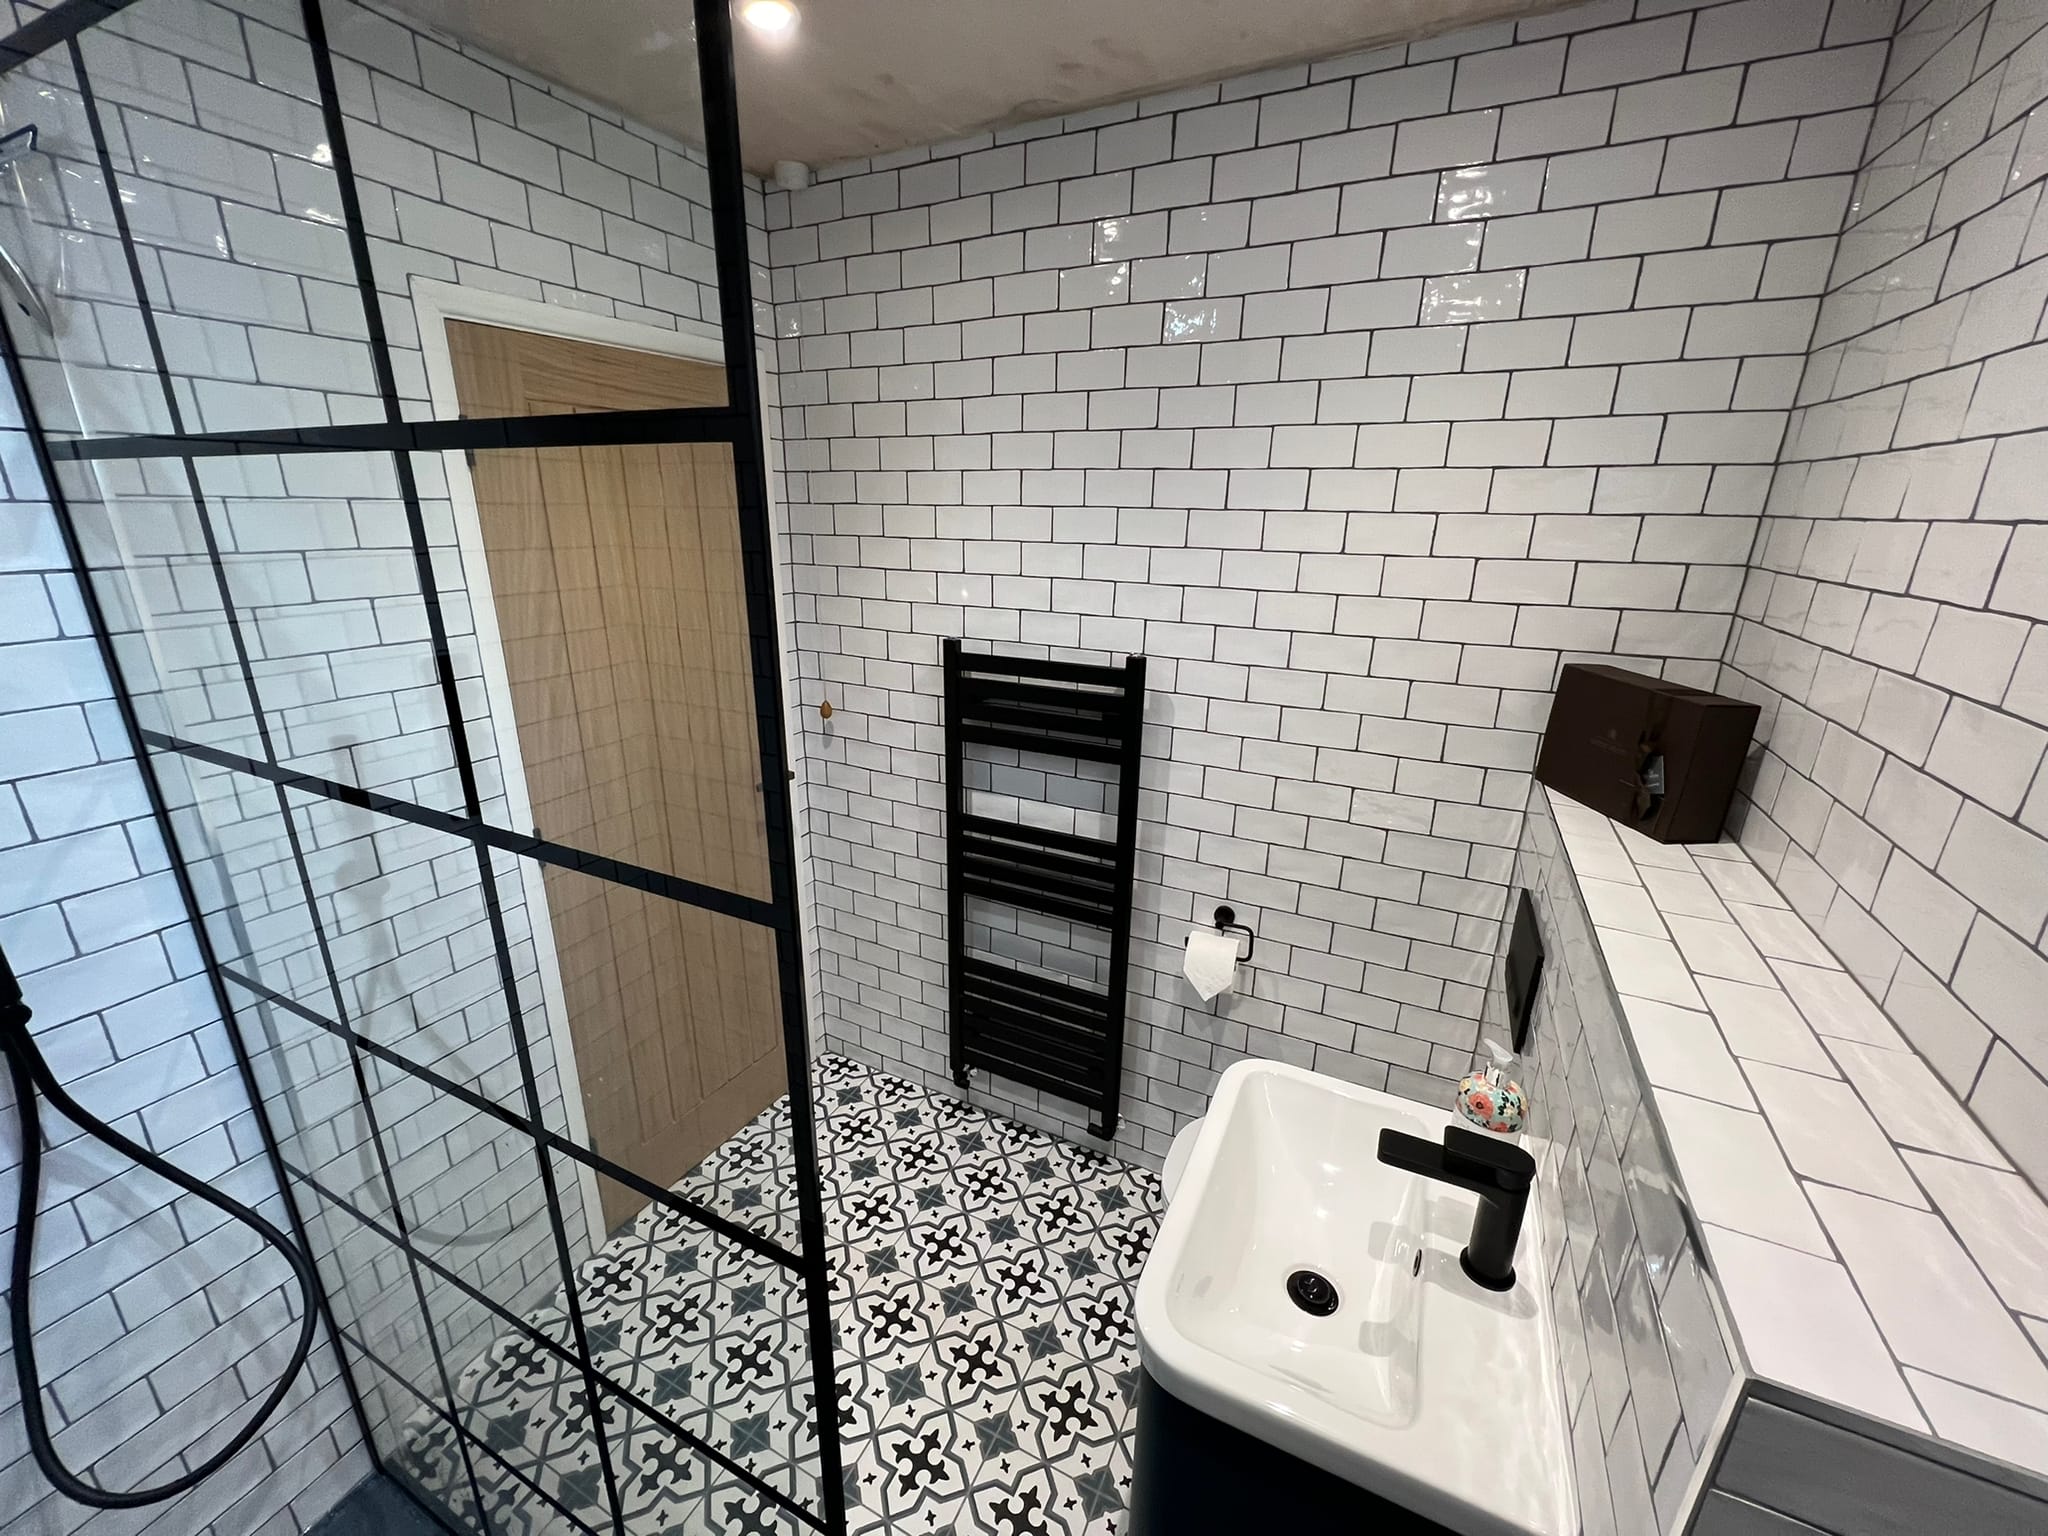 Monochrome bathroom with patterned floor tiles, brick wall tiles and black fittings